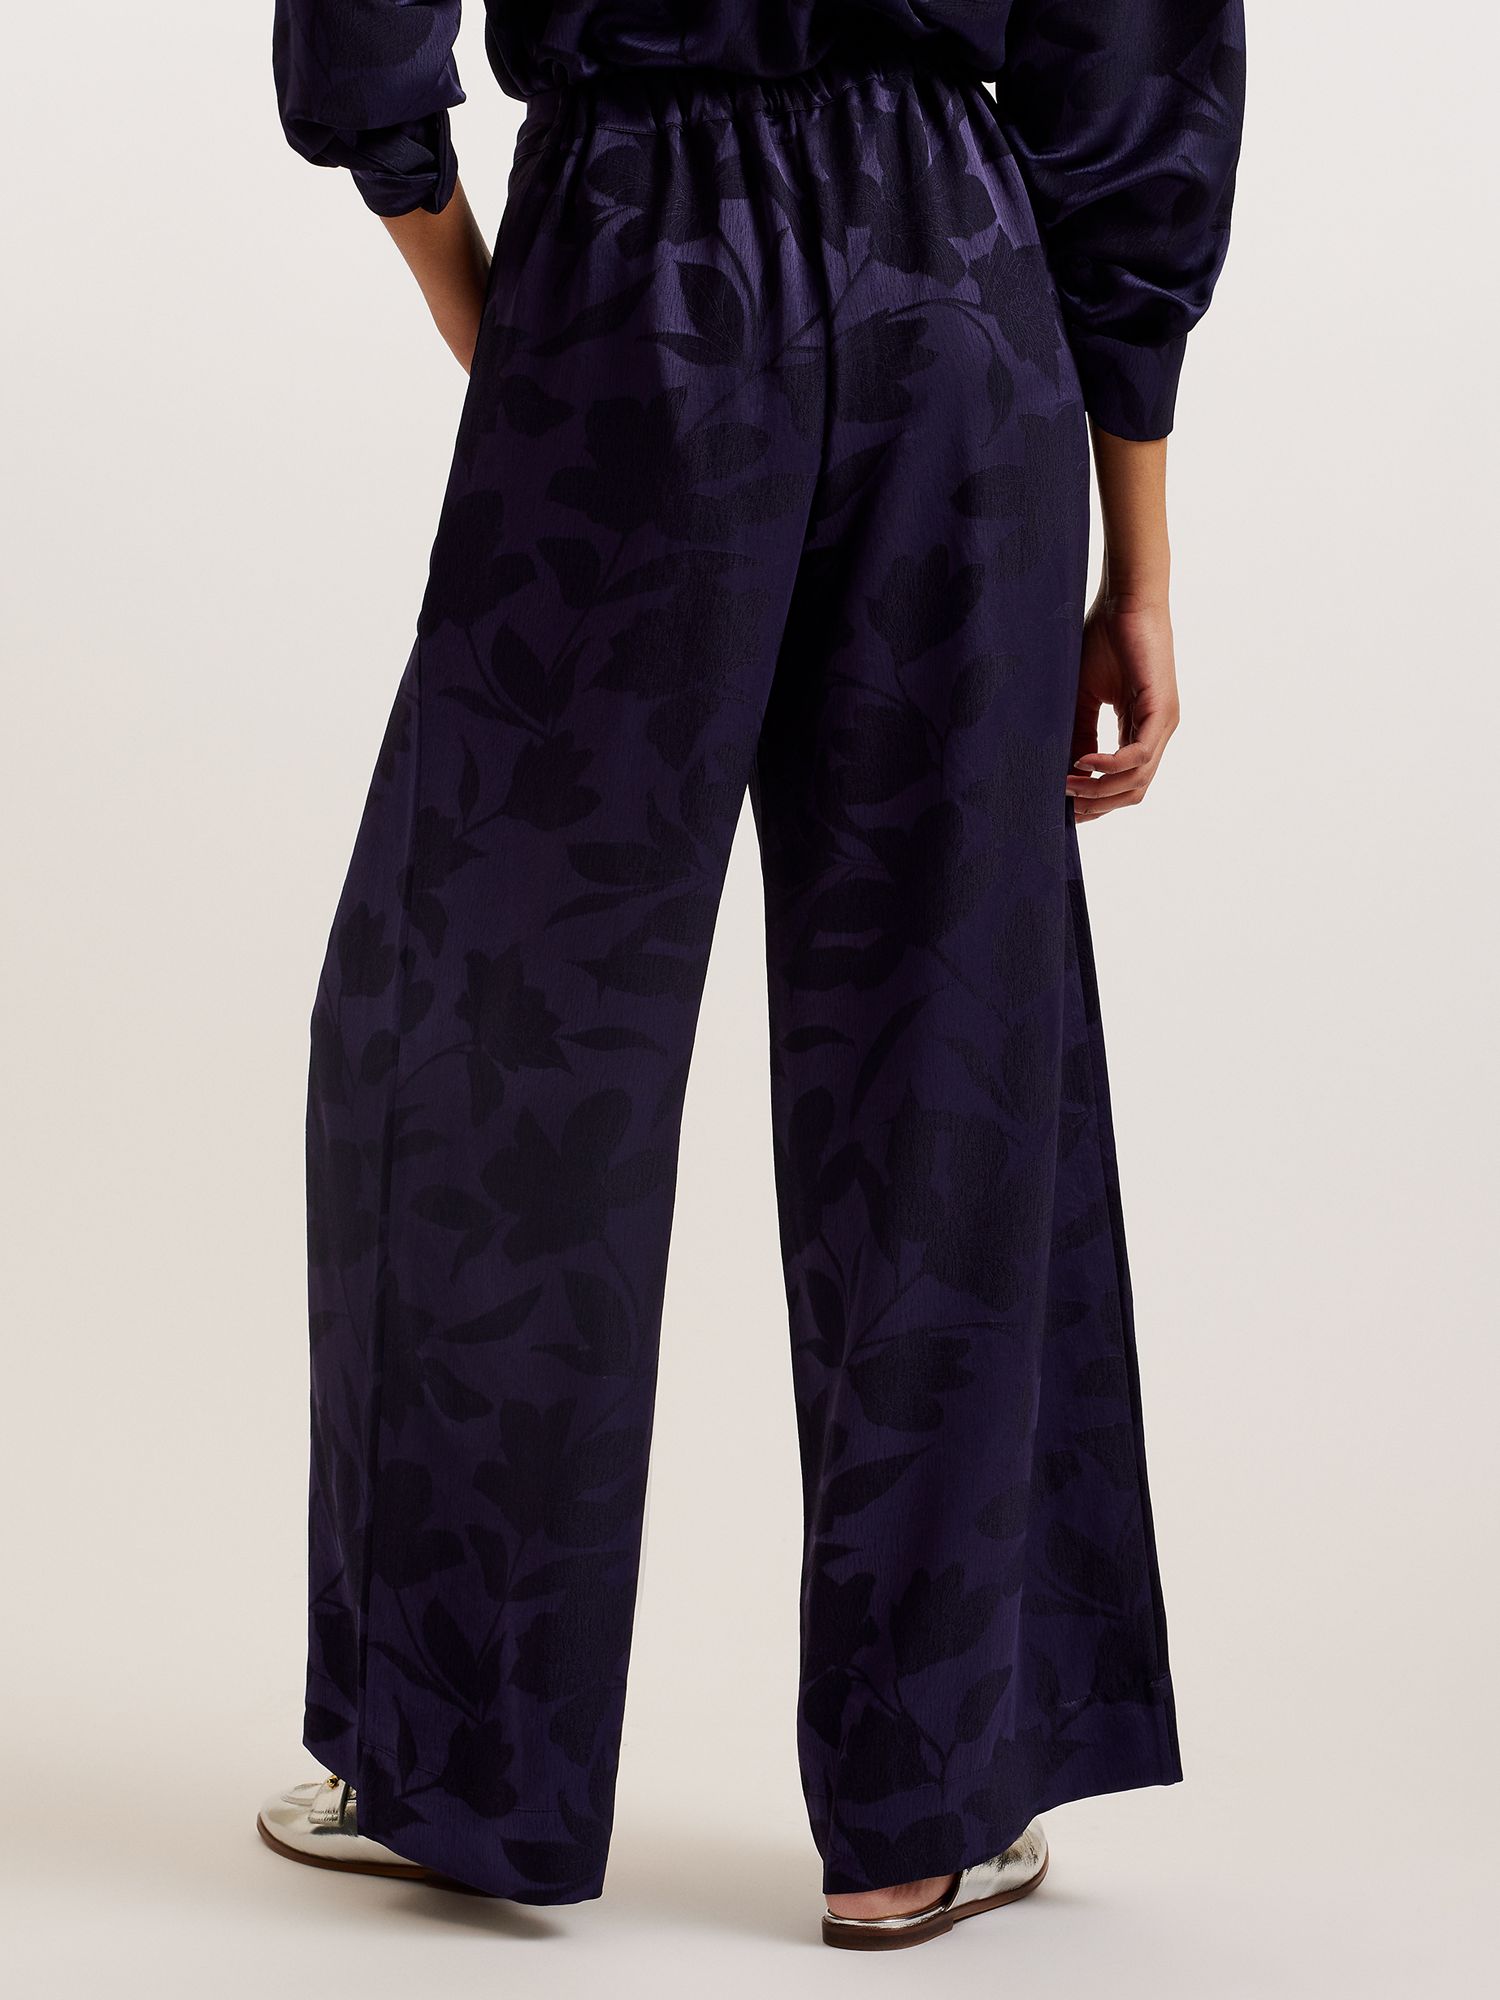 Ted Baker Maurah Jacquard Floral Wide Leg Trousers, Navy, 10